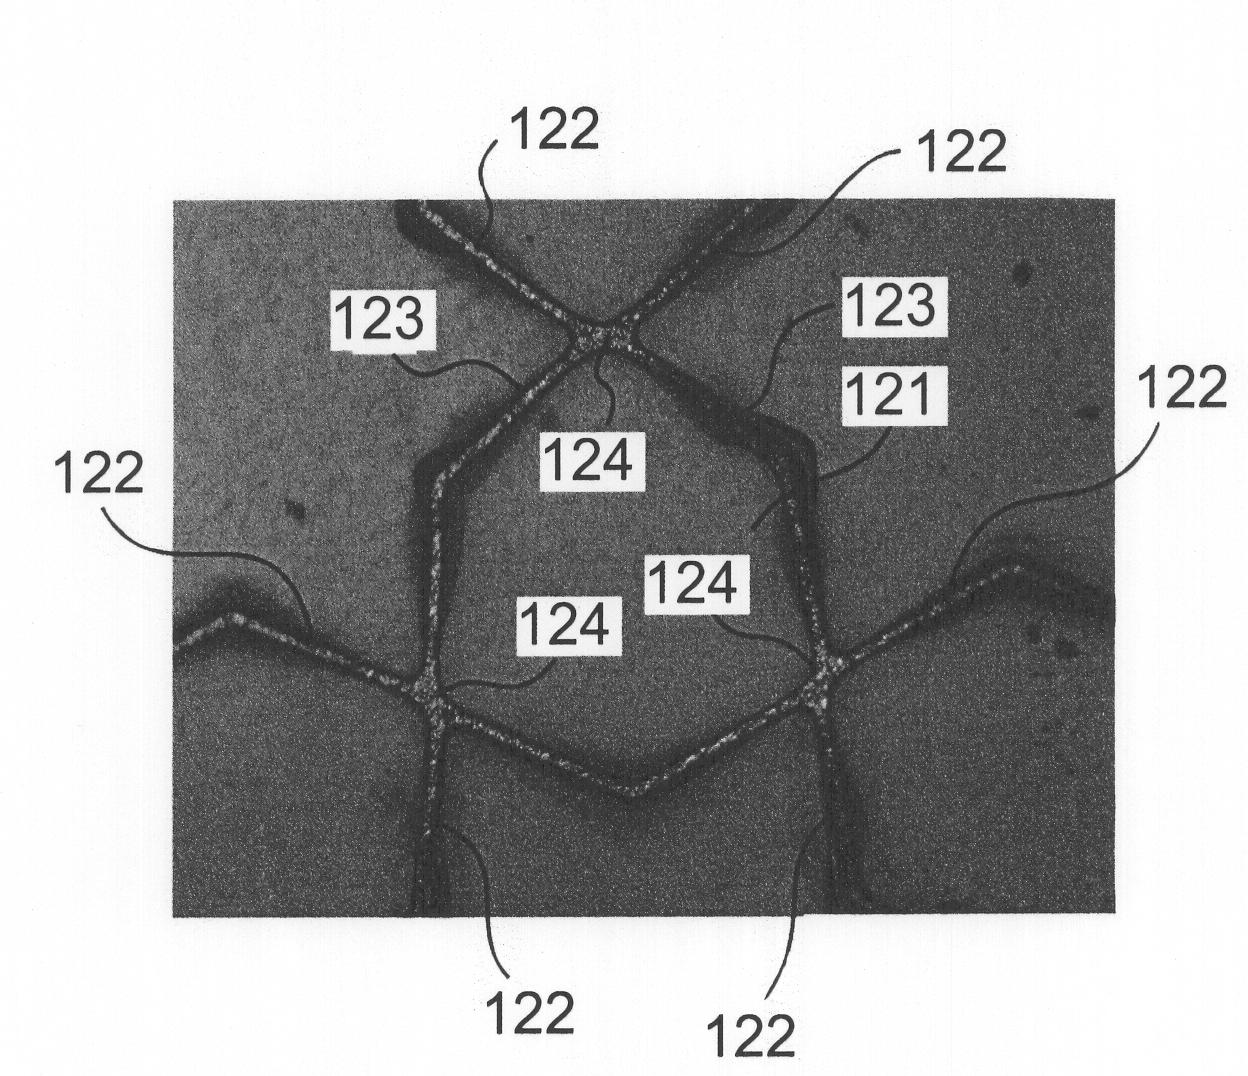 Mesh sheet and housing for electronic devices